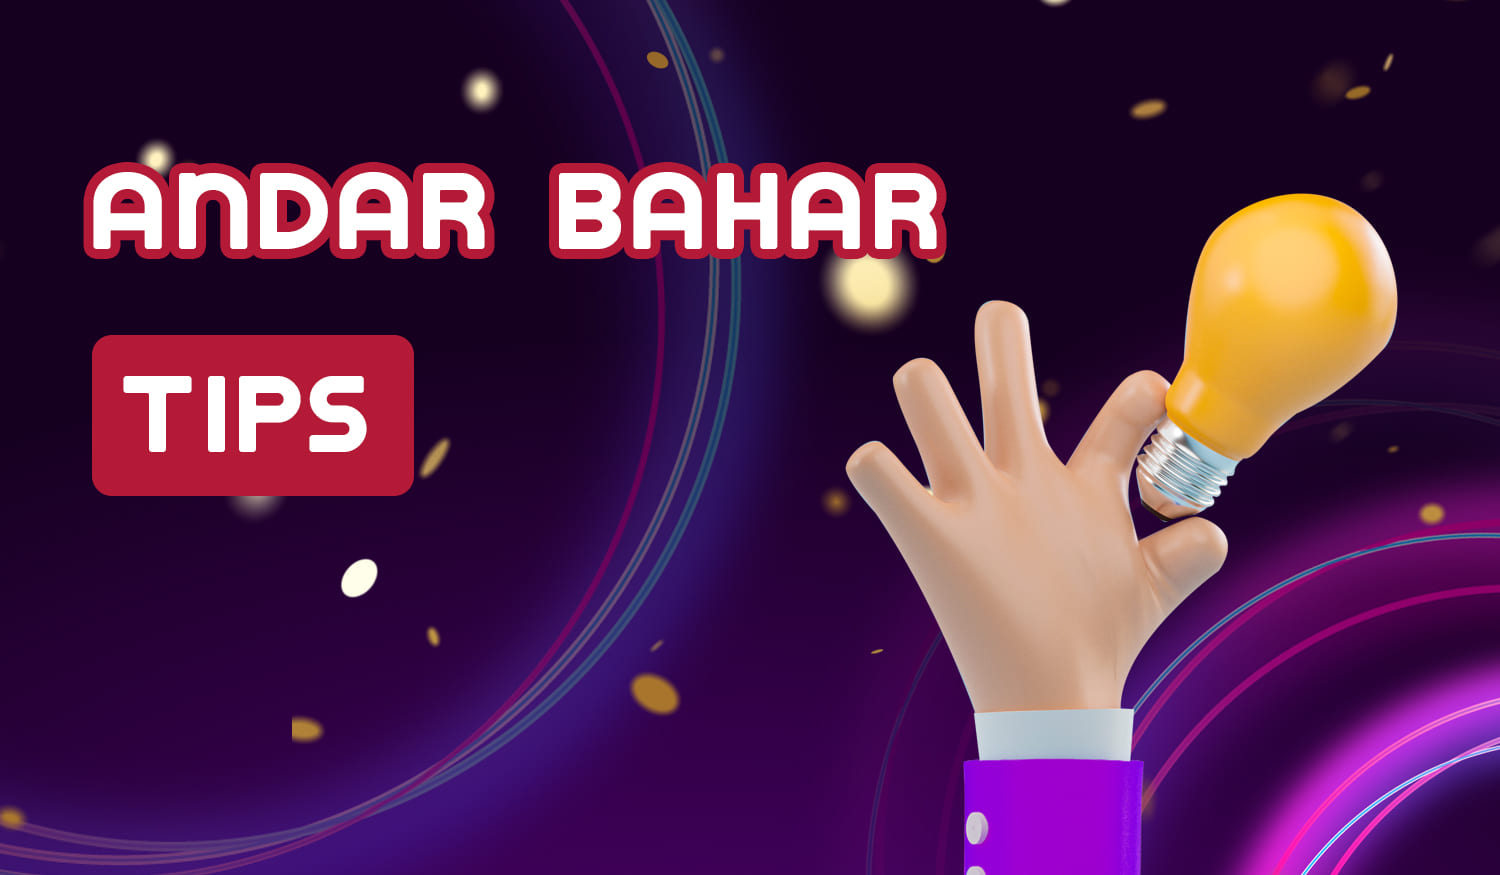 Hints that Indian users should use while playing Andar Bahar